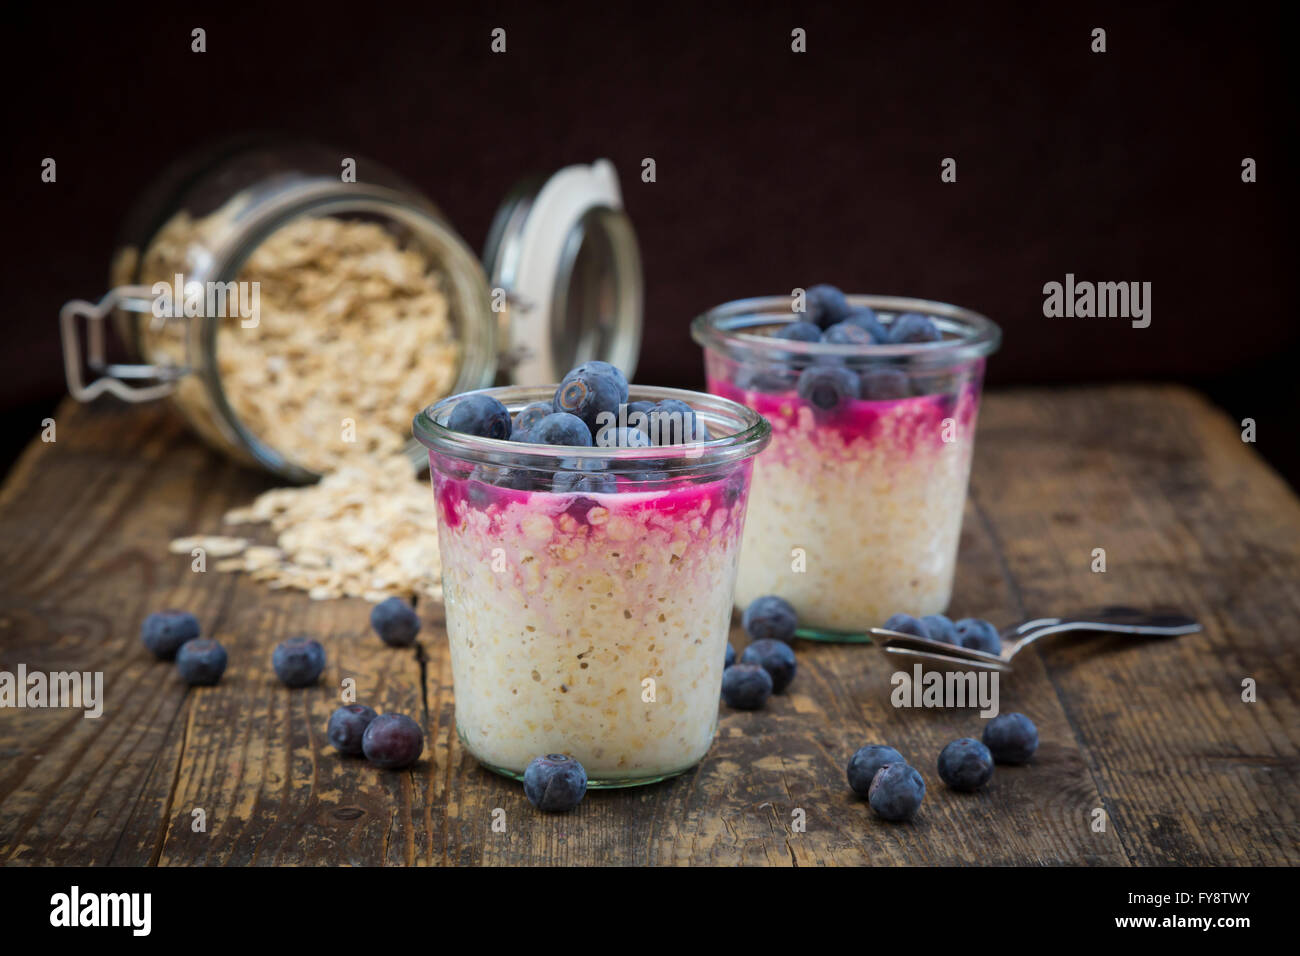 Two glasses of overnight oats with blueberries and berry juice on wood Stock Photo